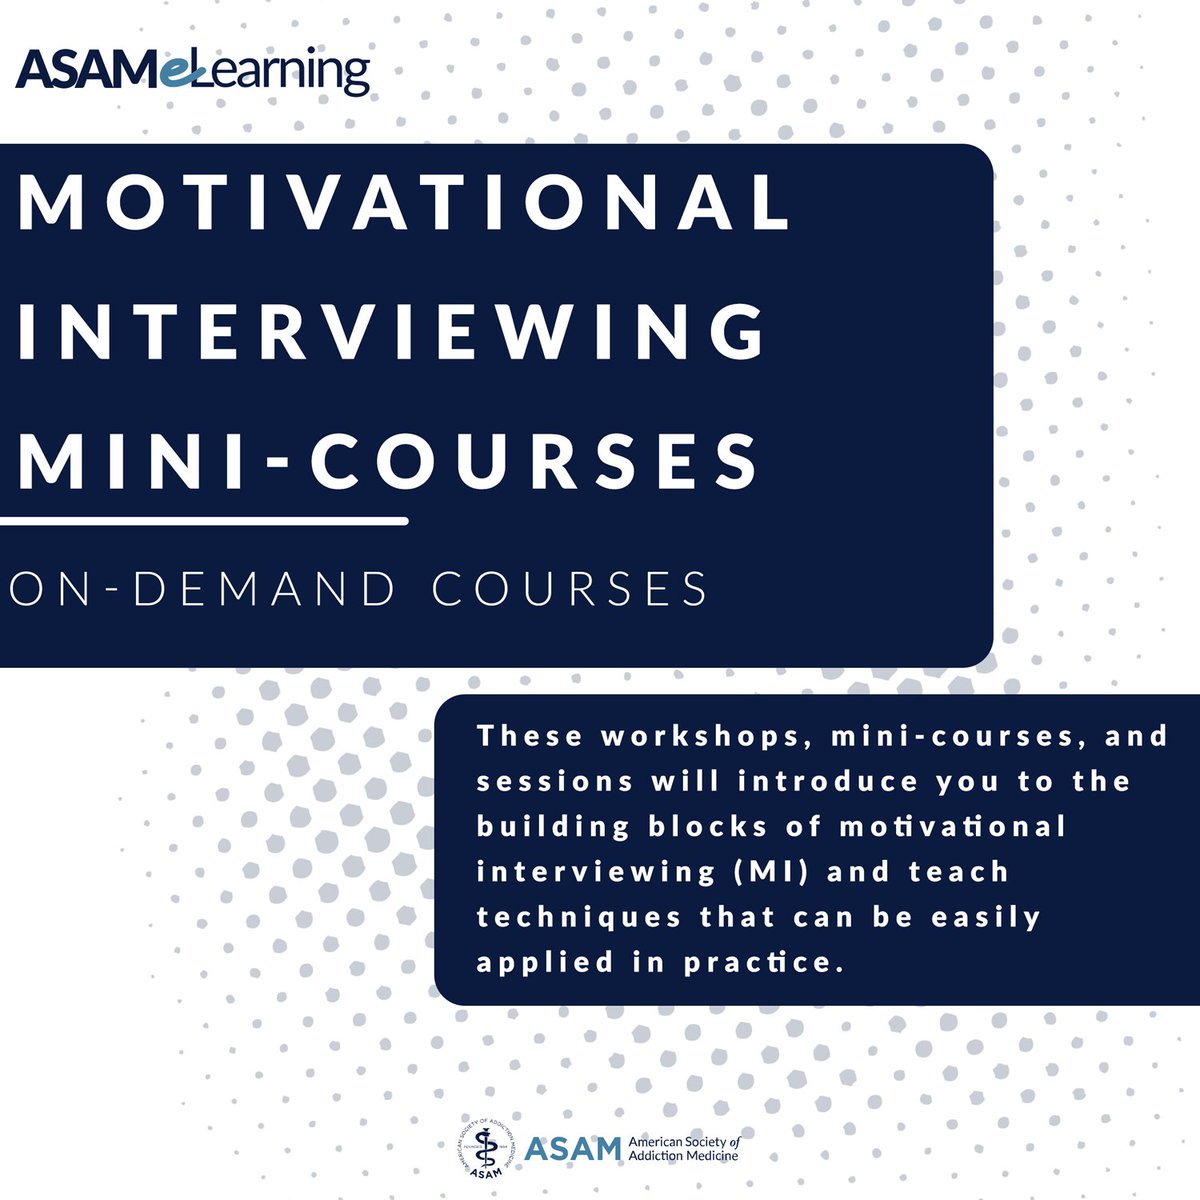 Learn more about our Motivational Interviewing mini-courses, available now in our eLearning center >> ow.ly/zpMs50RkYCw #MI #MotivationalInterviewing #ASAM #AddictionMedicine #AddictionTreatment #eLearning #OnlineLearning #MedEd